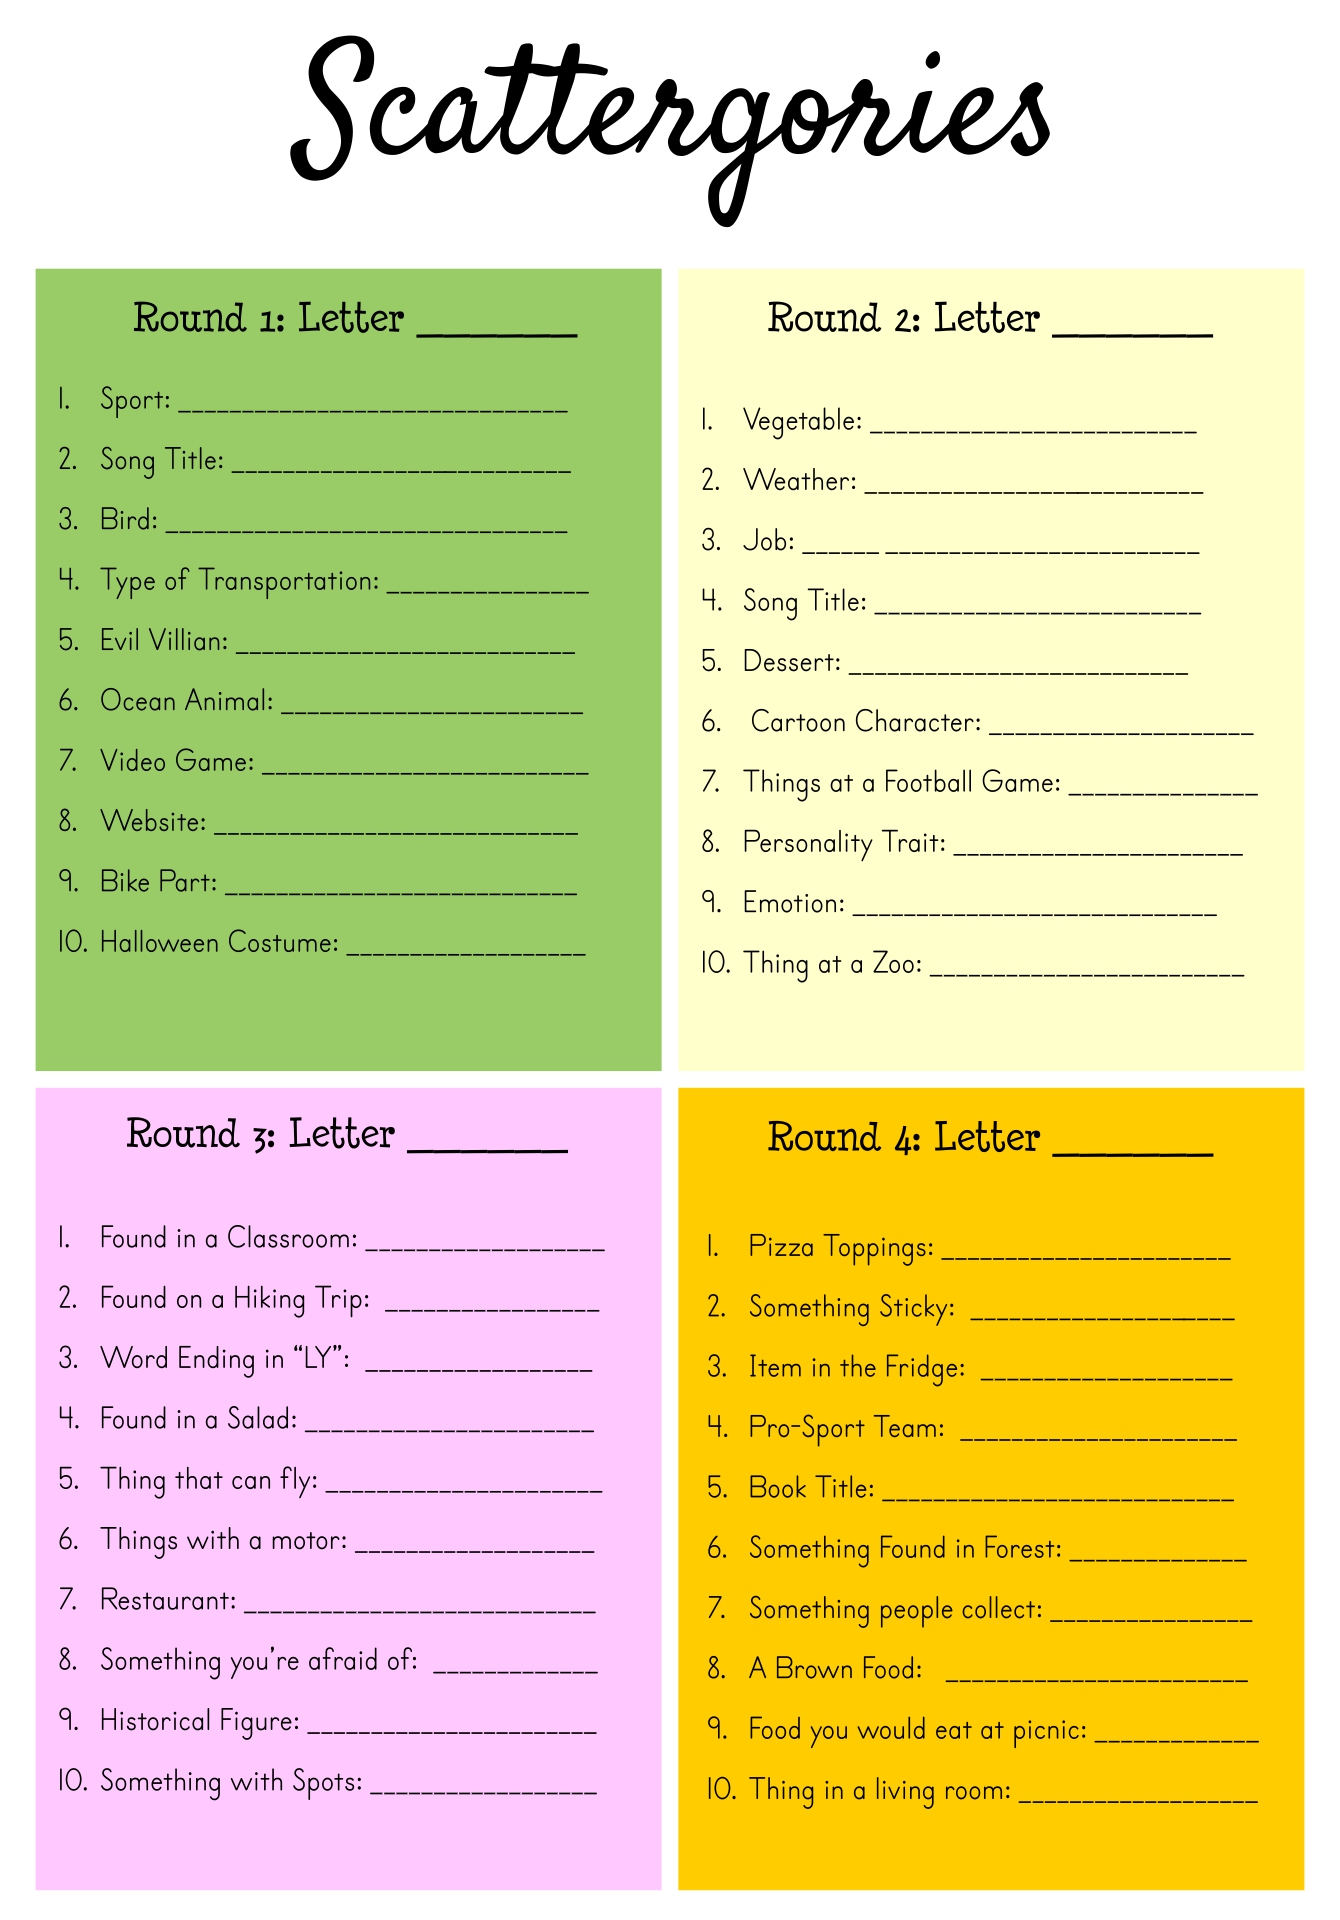 funny scattergories lists